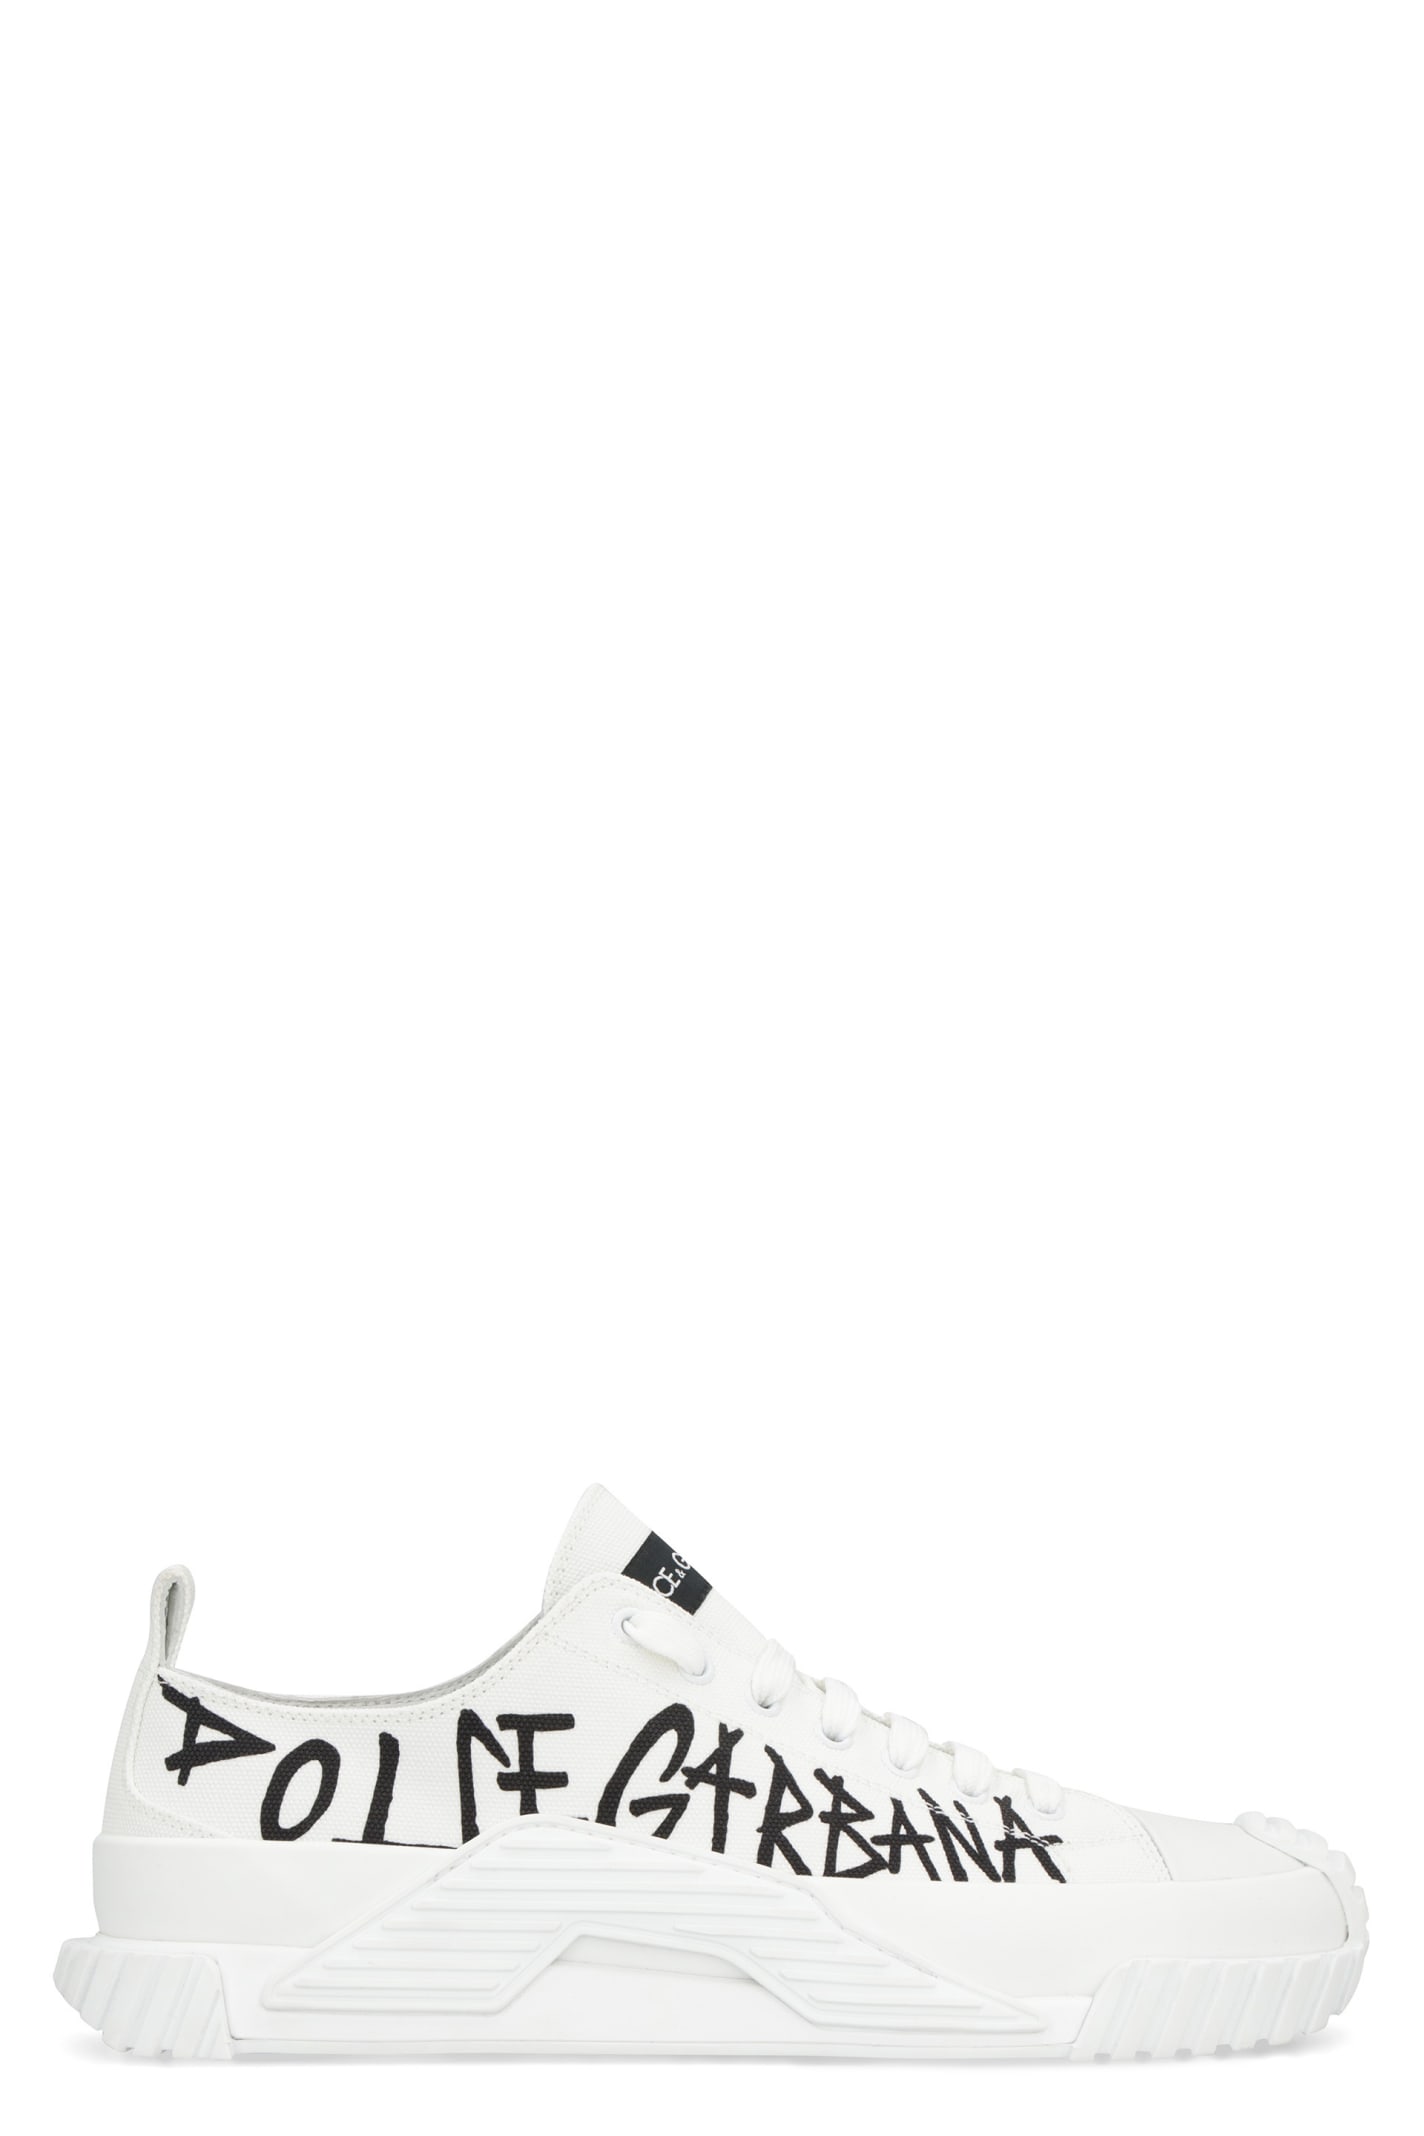 Dolce & Gabbana Canvas Sneakers